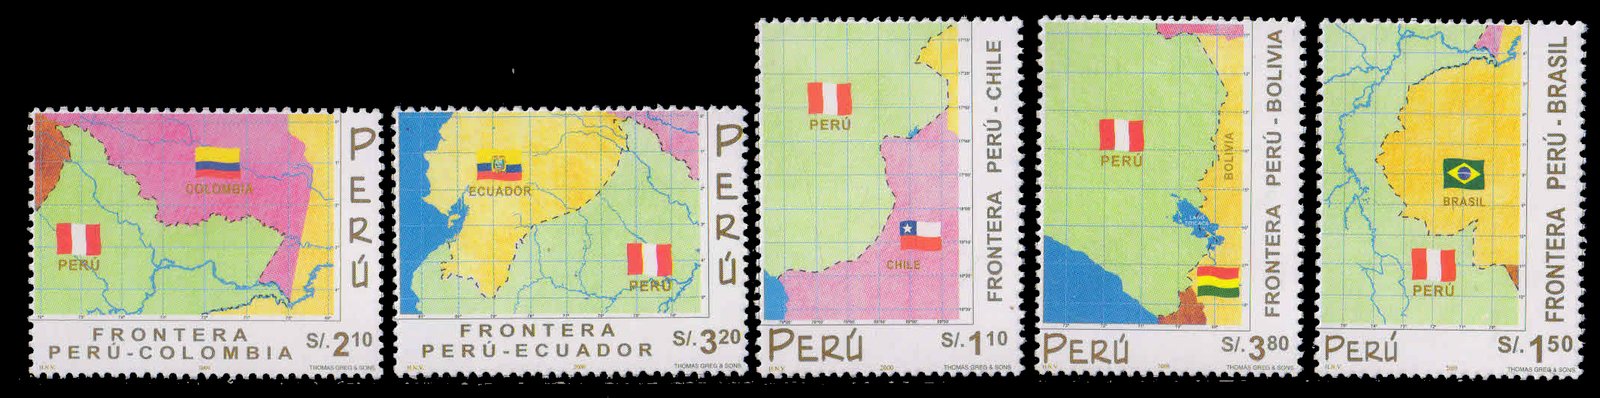 PERU 2000-National Borders of Peru on Map with Flags Chile, Brazil,  Colombia, Ecuador, Bolivia, Set of 5, MNH, S.G. 2080-84-Cat � 26-